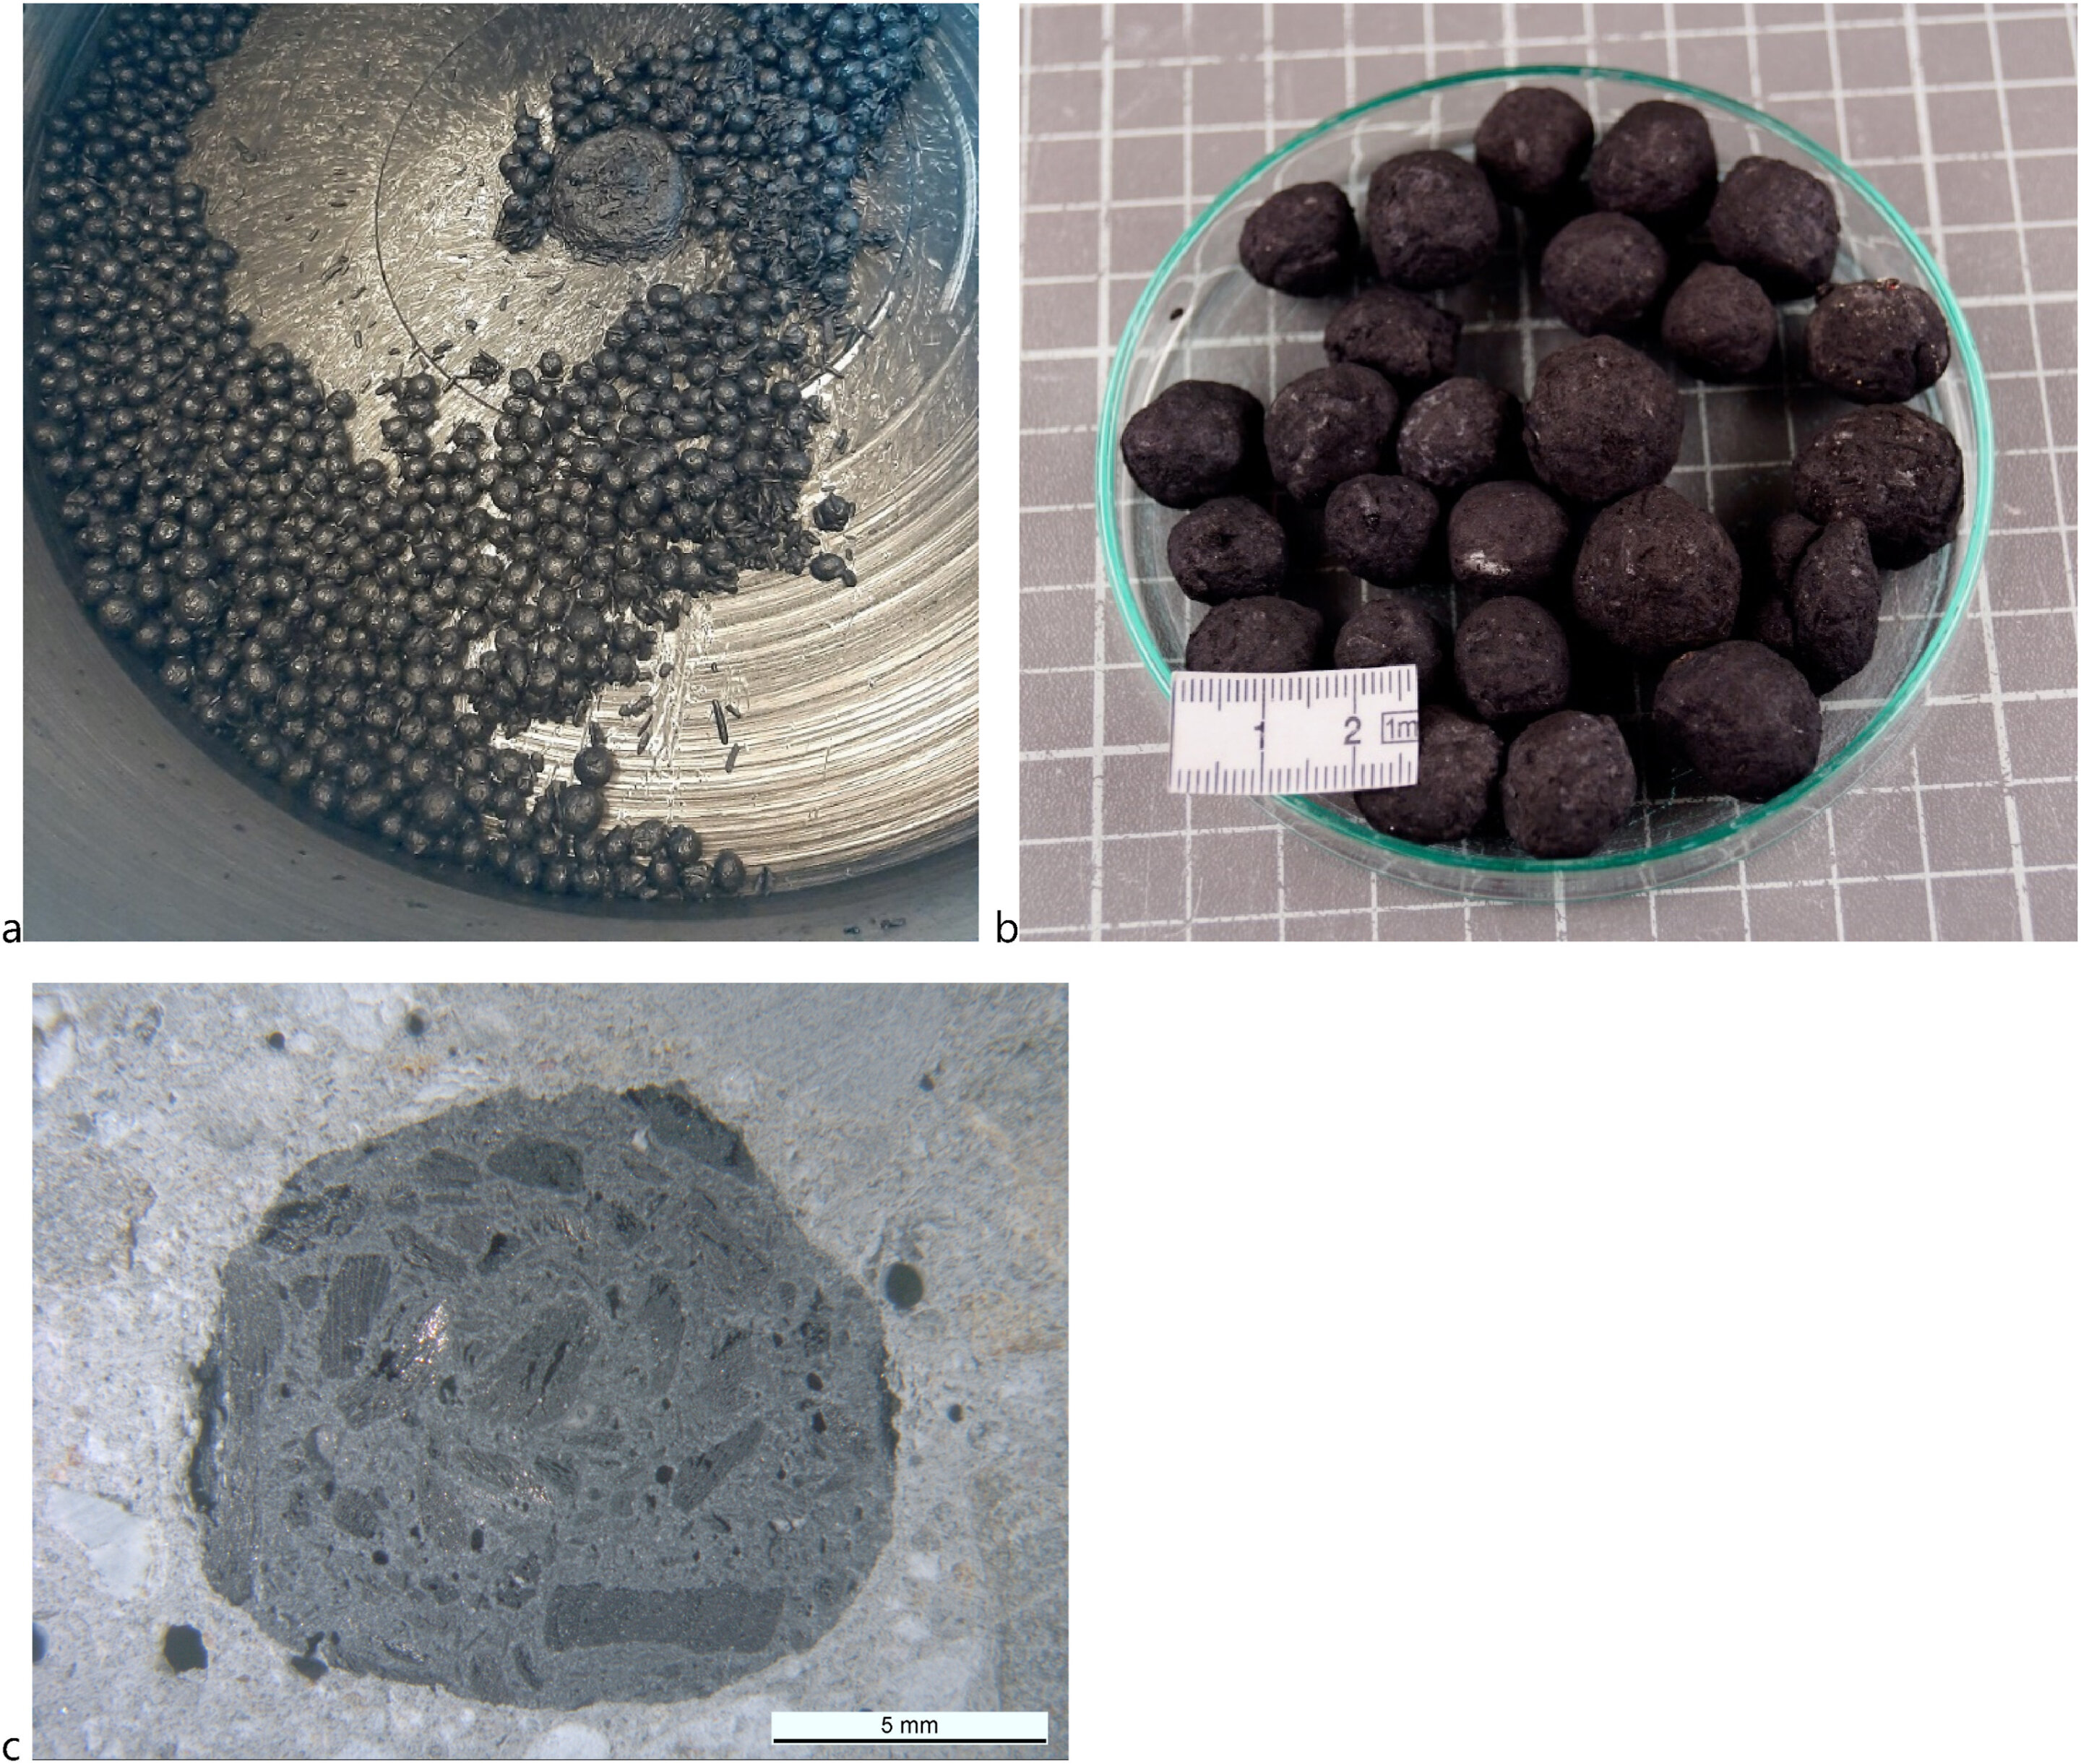 #Processing biochar into pellets to offset emissions in concrete production